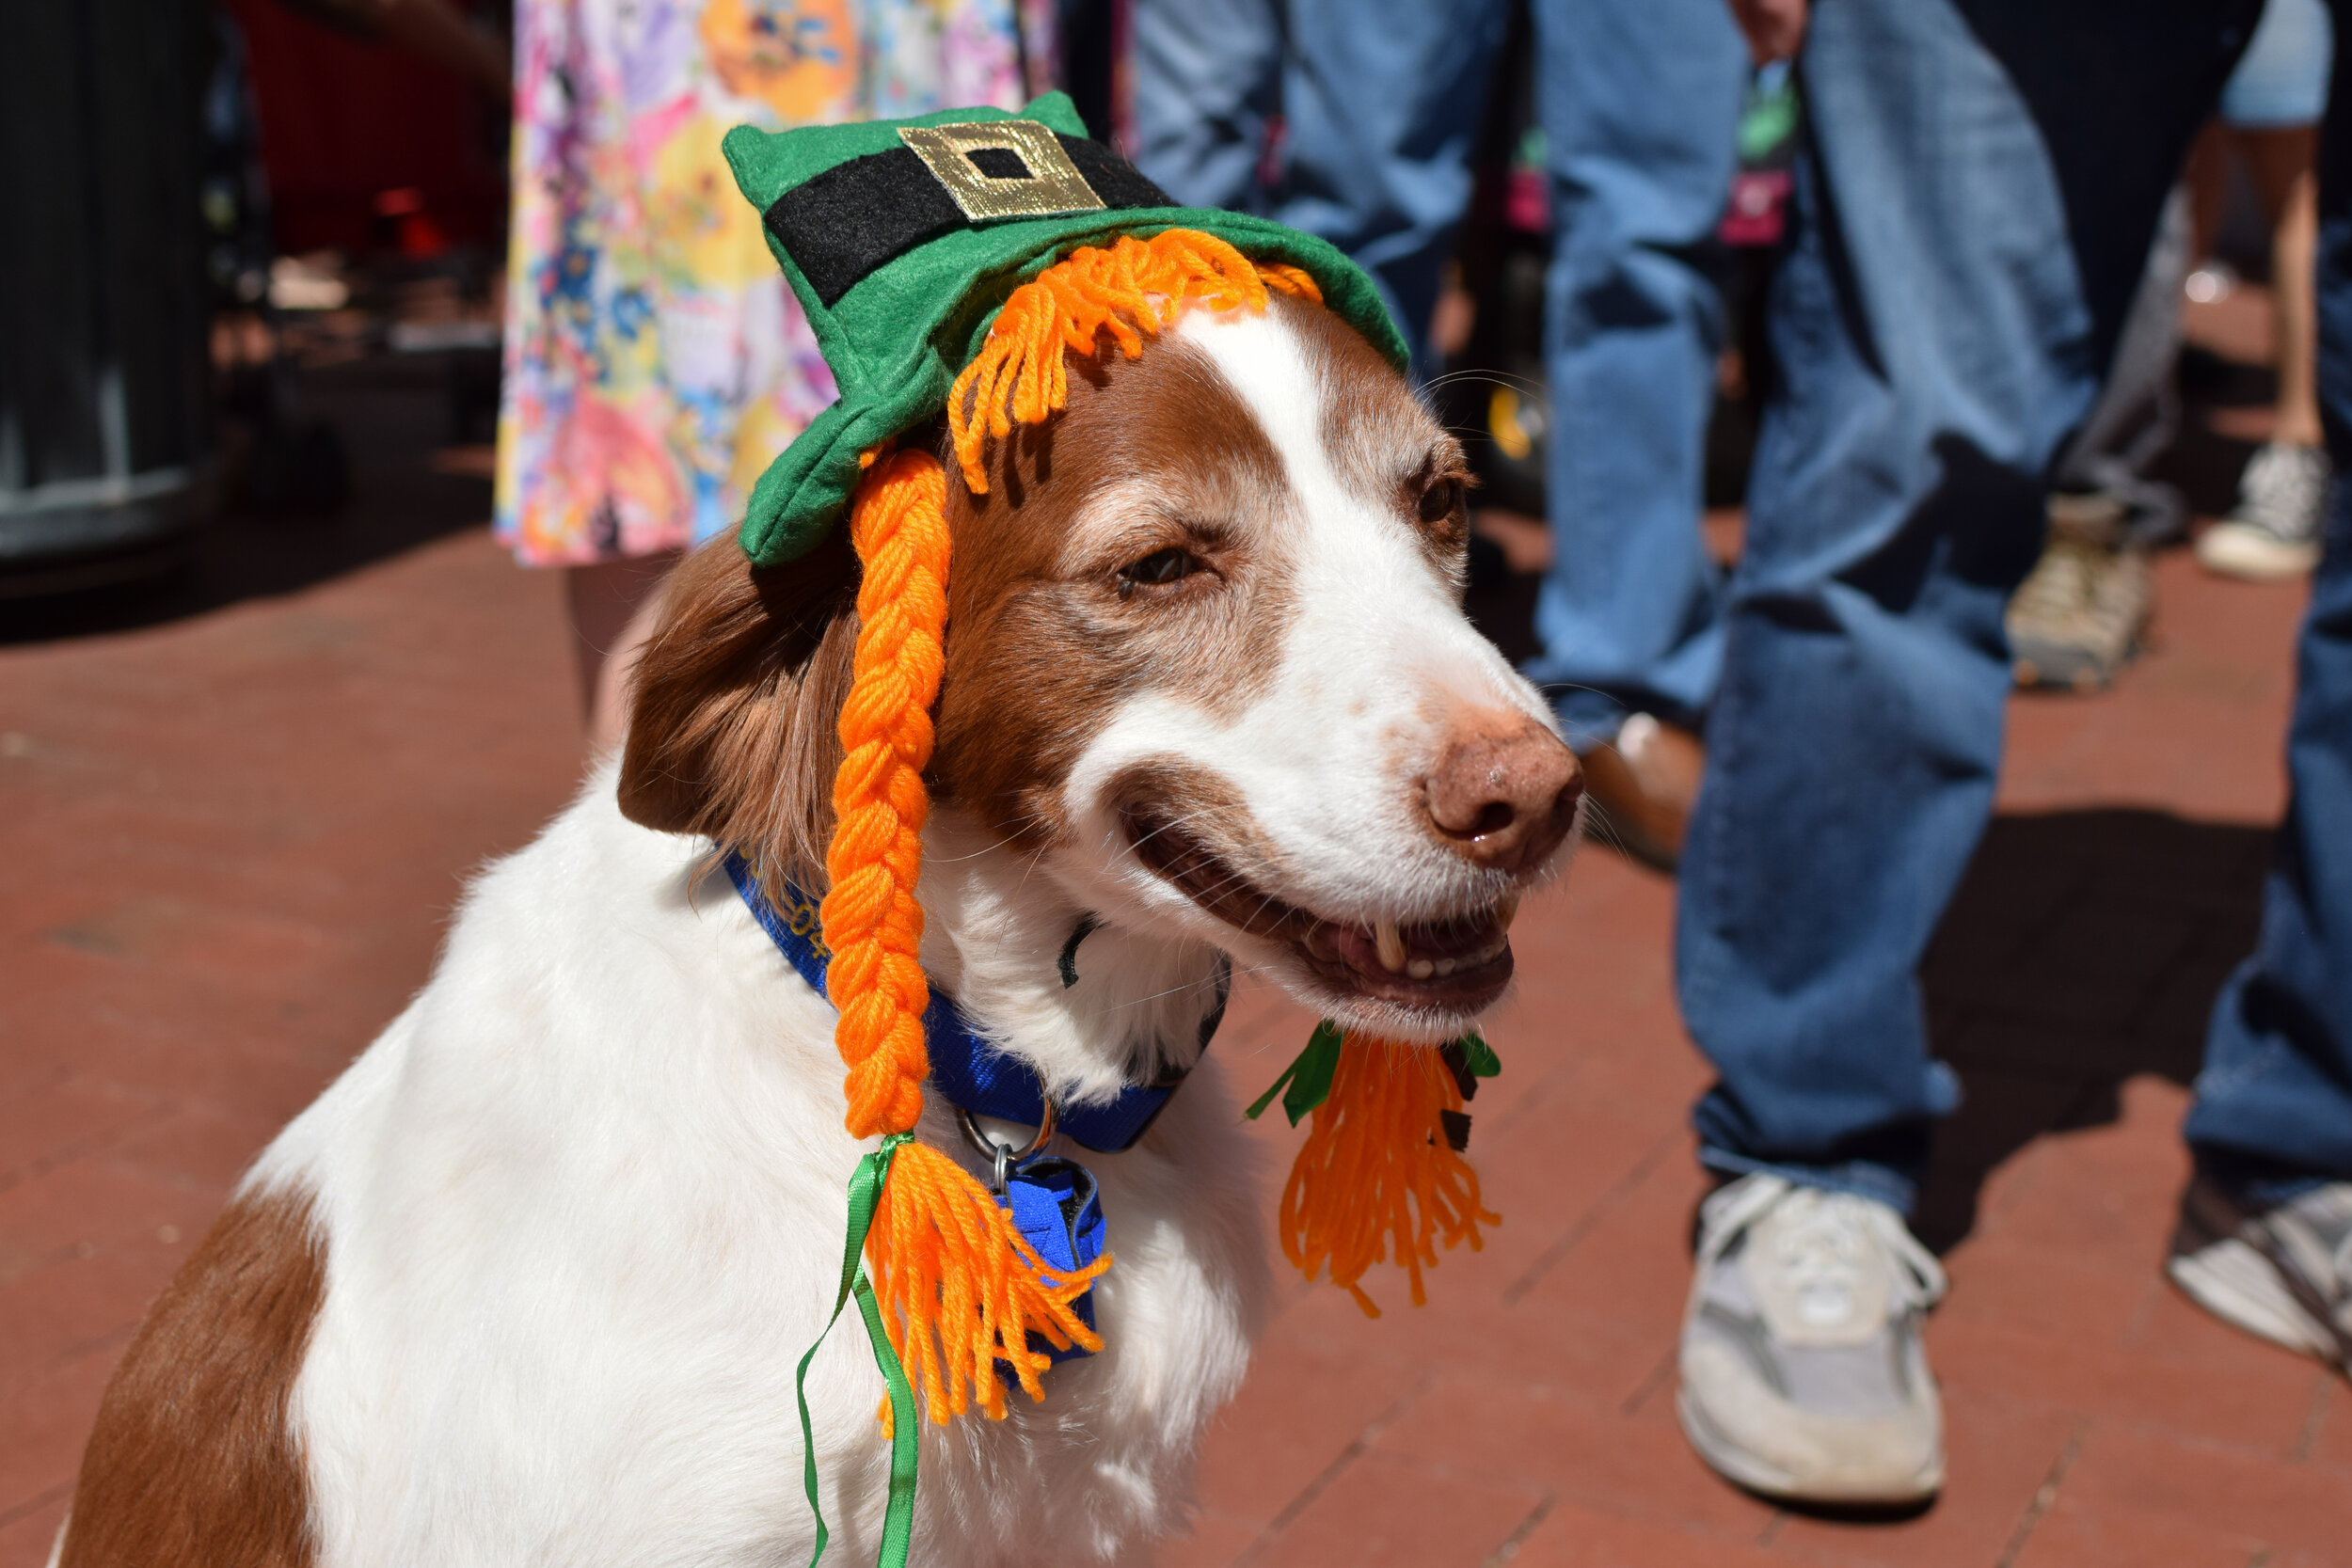  Pets were welcome at the St. Patty's Day Stroll on State St. in Santa Barbara.  